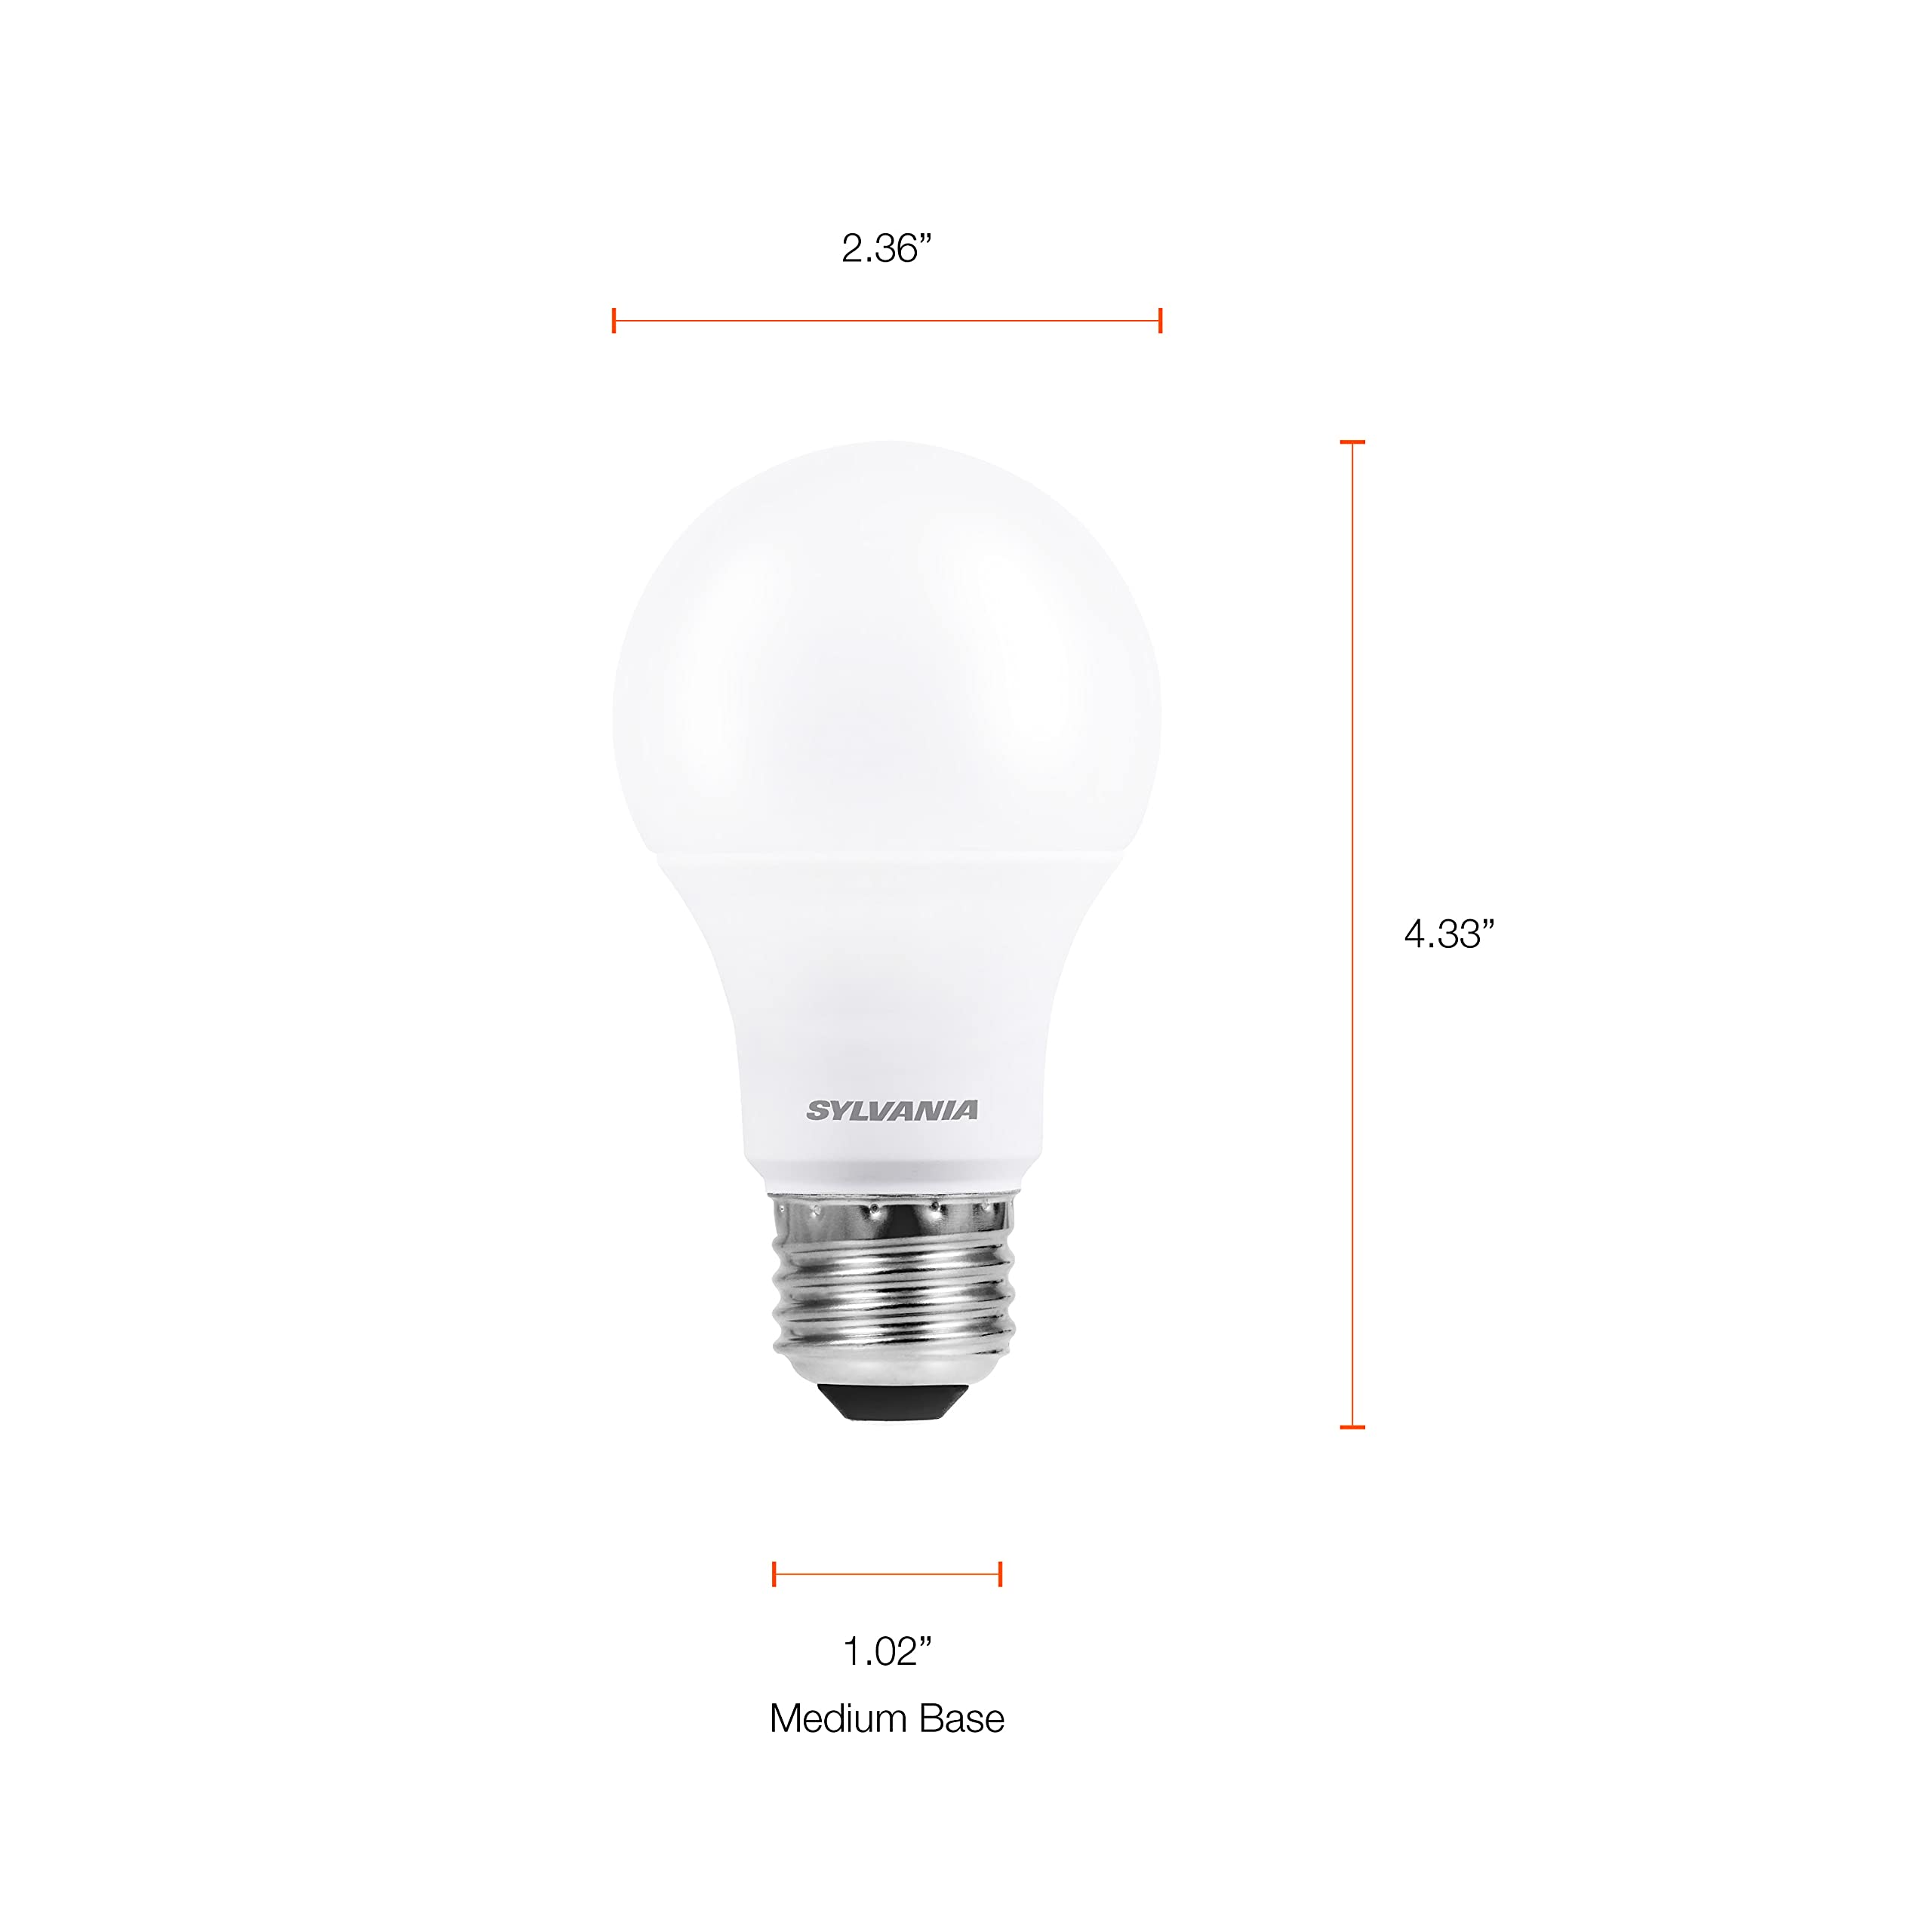 SYLVANIA ECO LED A19 Light Bulb, 100W Equivalent, Efficient 14.5W, 7 Year, 1450 Lumens, Non-Dimmable, Frosted, 2700K, Soft White - 6 Pack (40885)